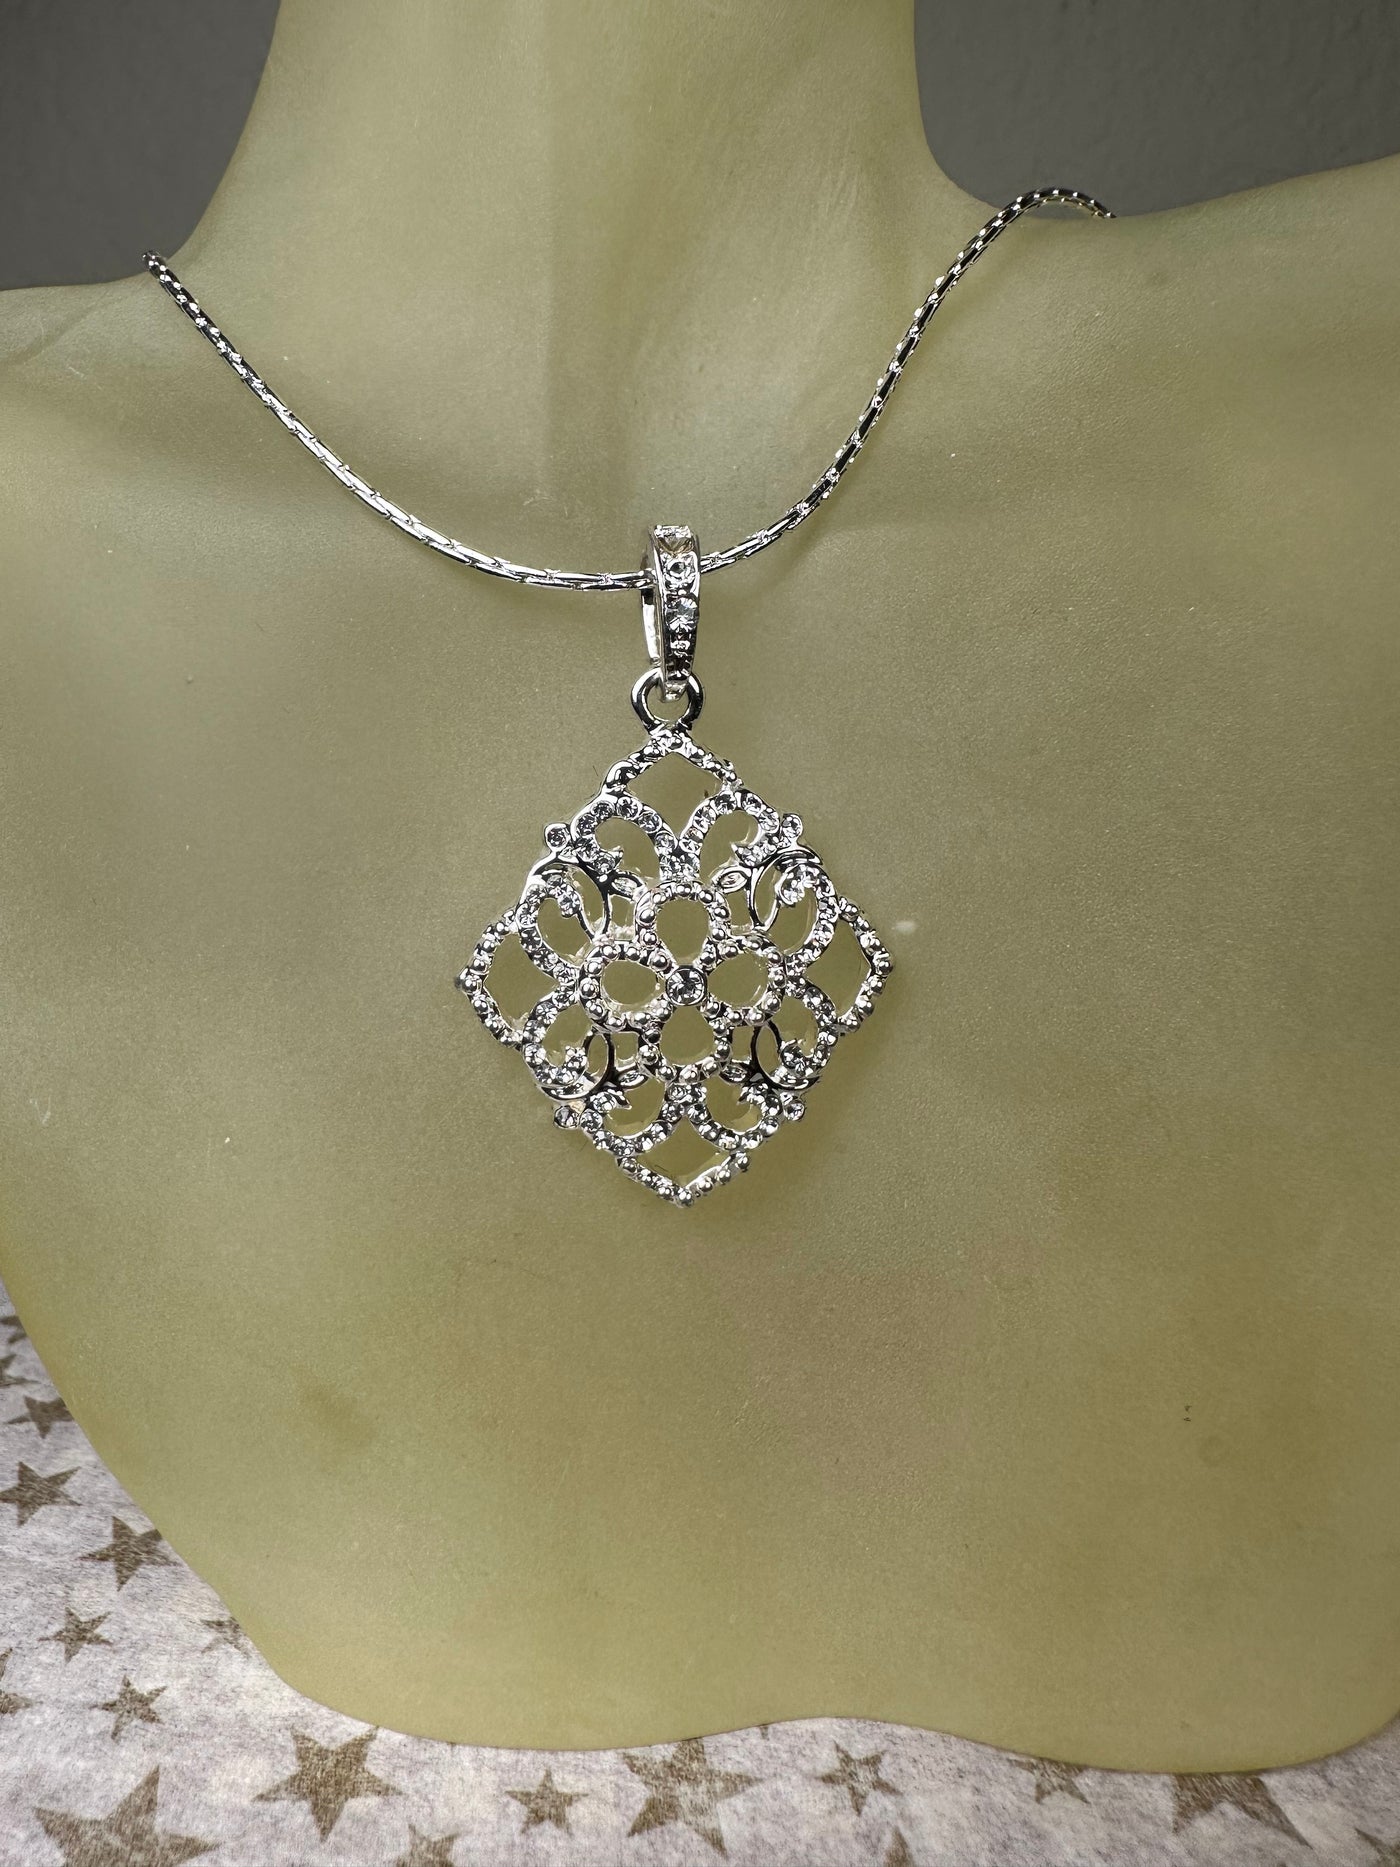 Silver Tone Filigree Diamond Shape Pendant Necklace with Crystals